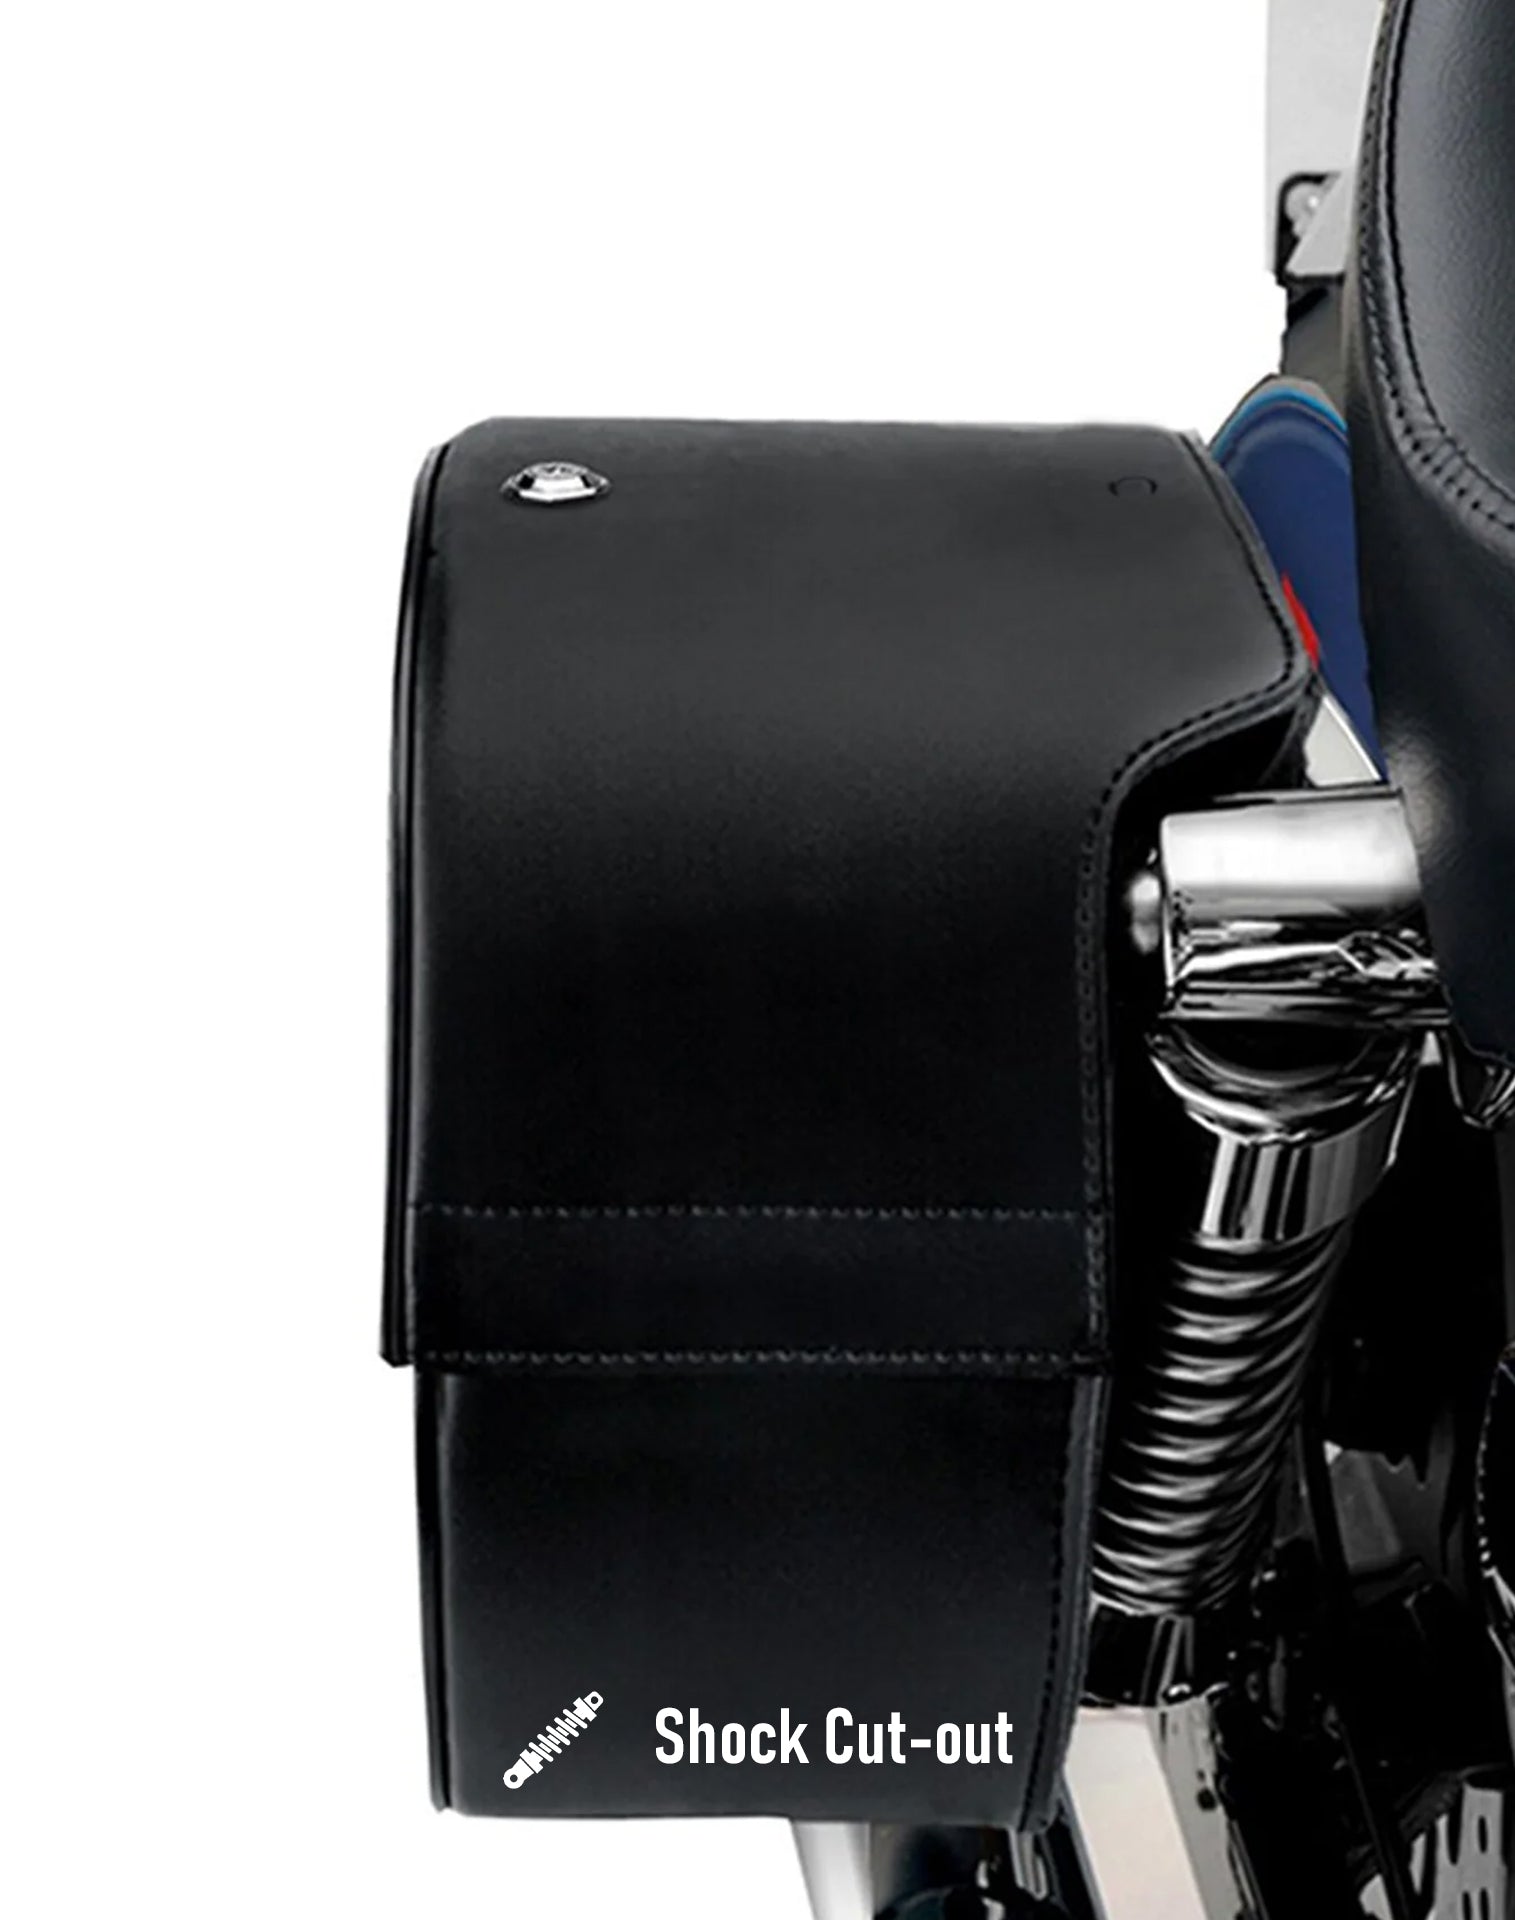 Viking Warrior Large Triumph Thunderbird Lt Shock Cut Out Leather Motorcycle Saddlebags Hard Shell Construction